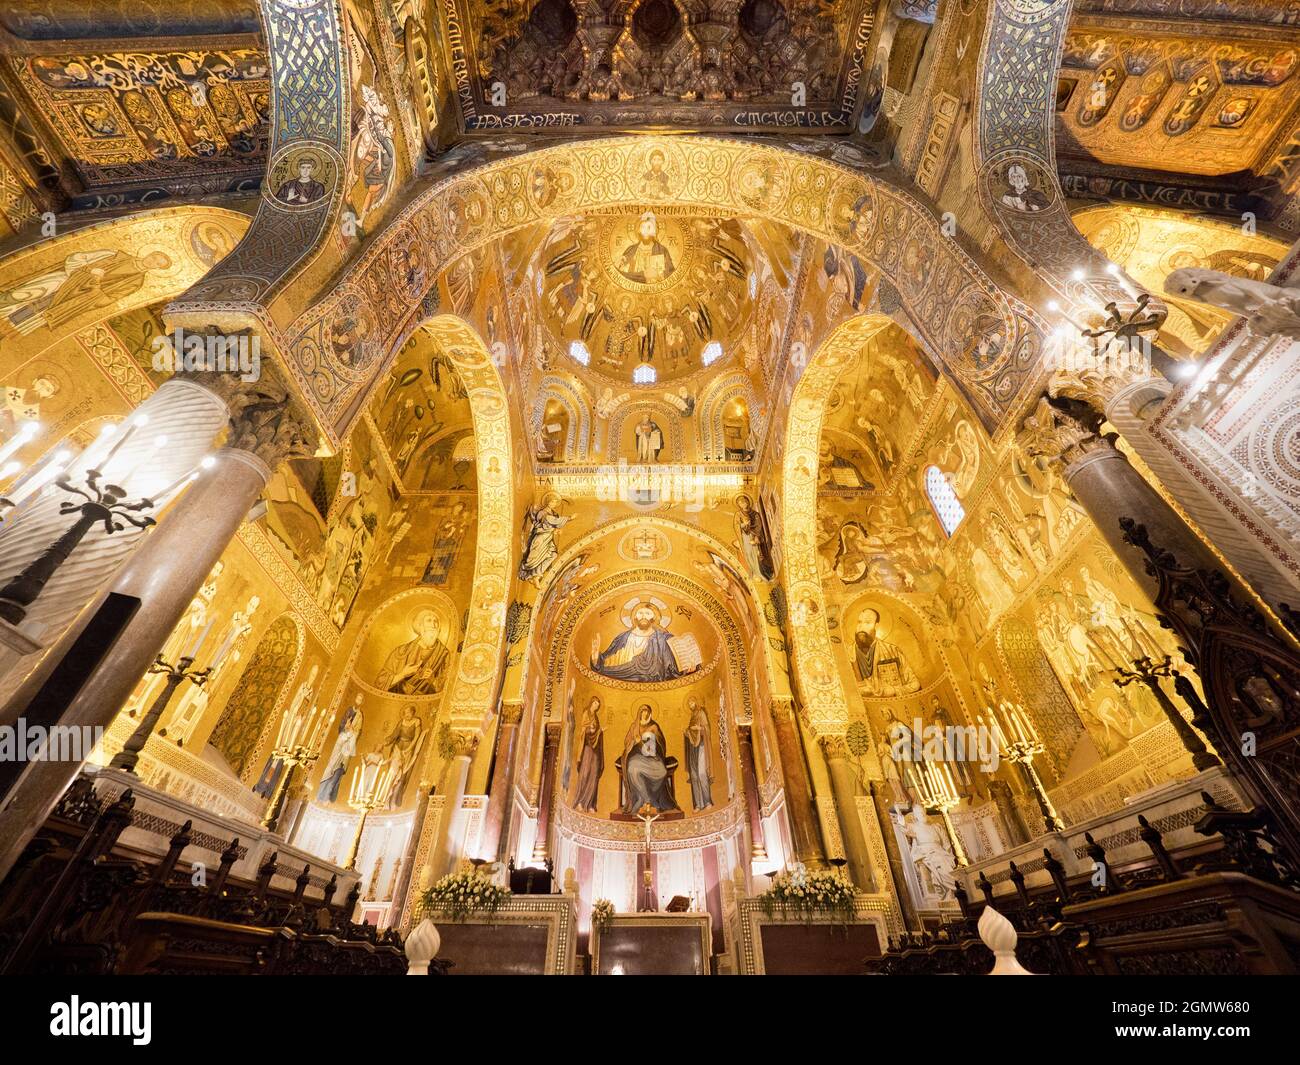 Palermo, Sicily, Italy - 23 September 2019   The Palatine Chapel (Cappella Palatina), is the royal chapel of the Norman kings of Sicily in Palermo, Si Stock Photo